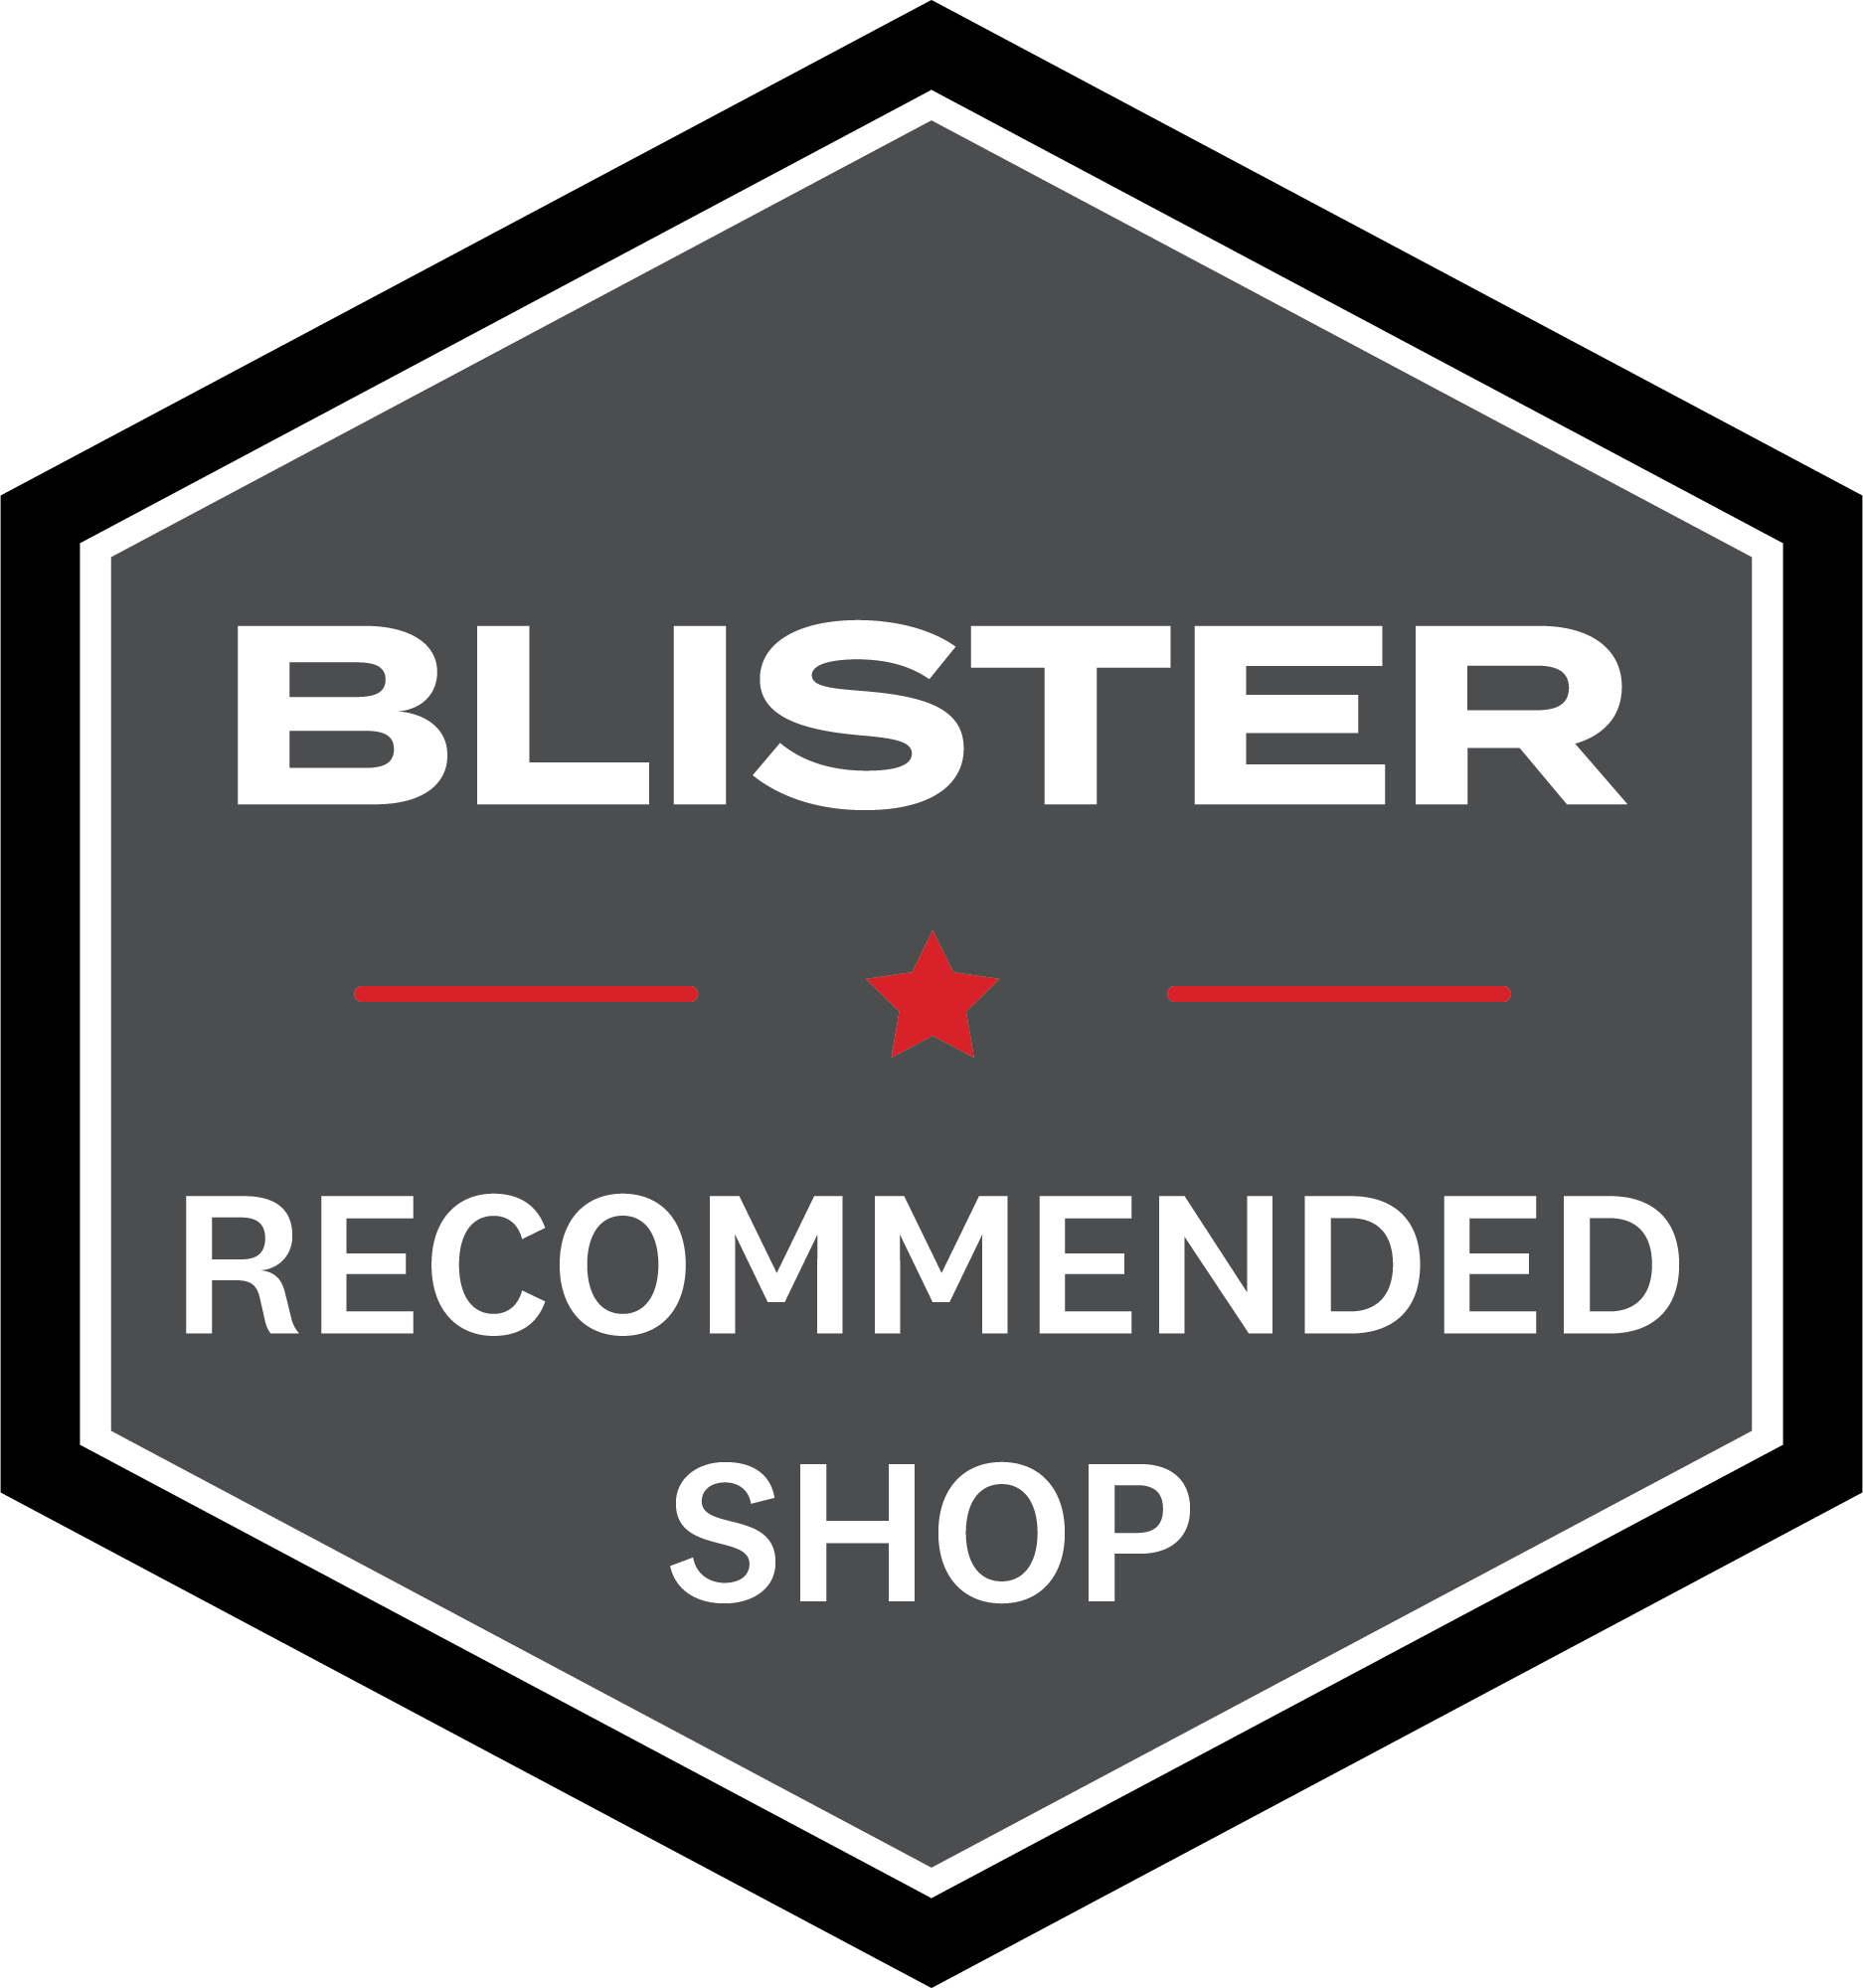 An emblem for Blister Review recommended shops